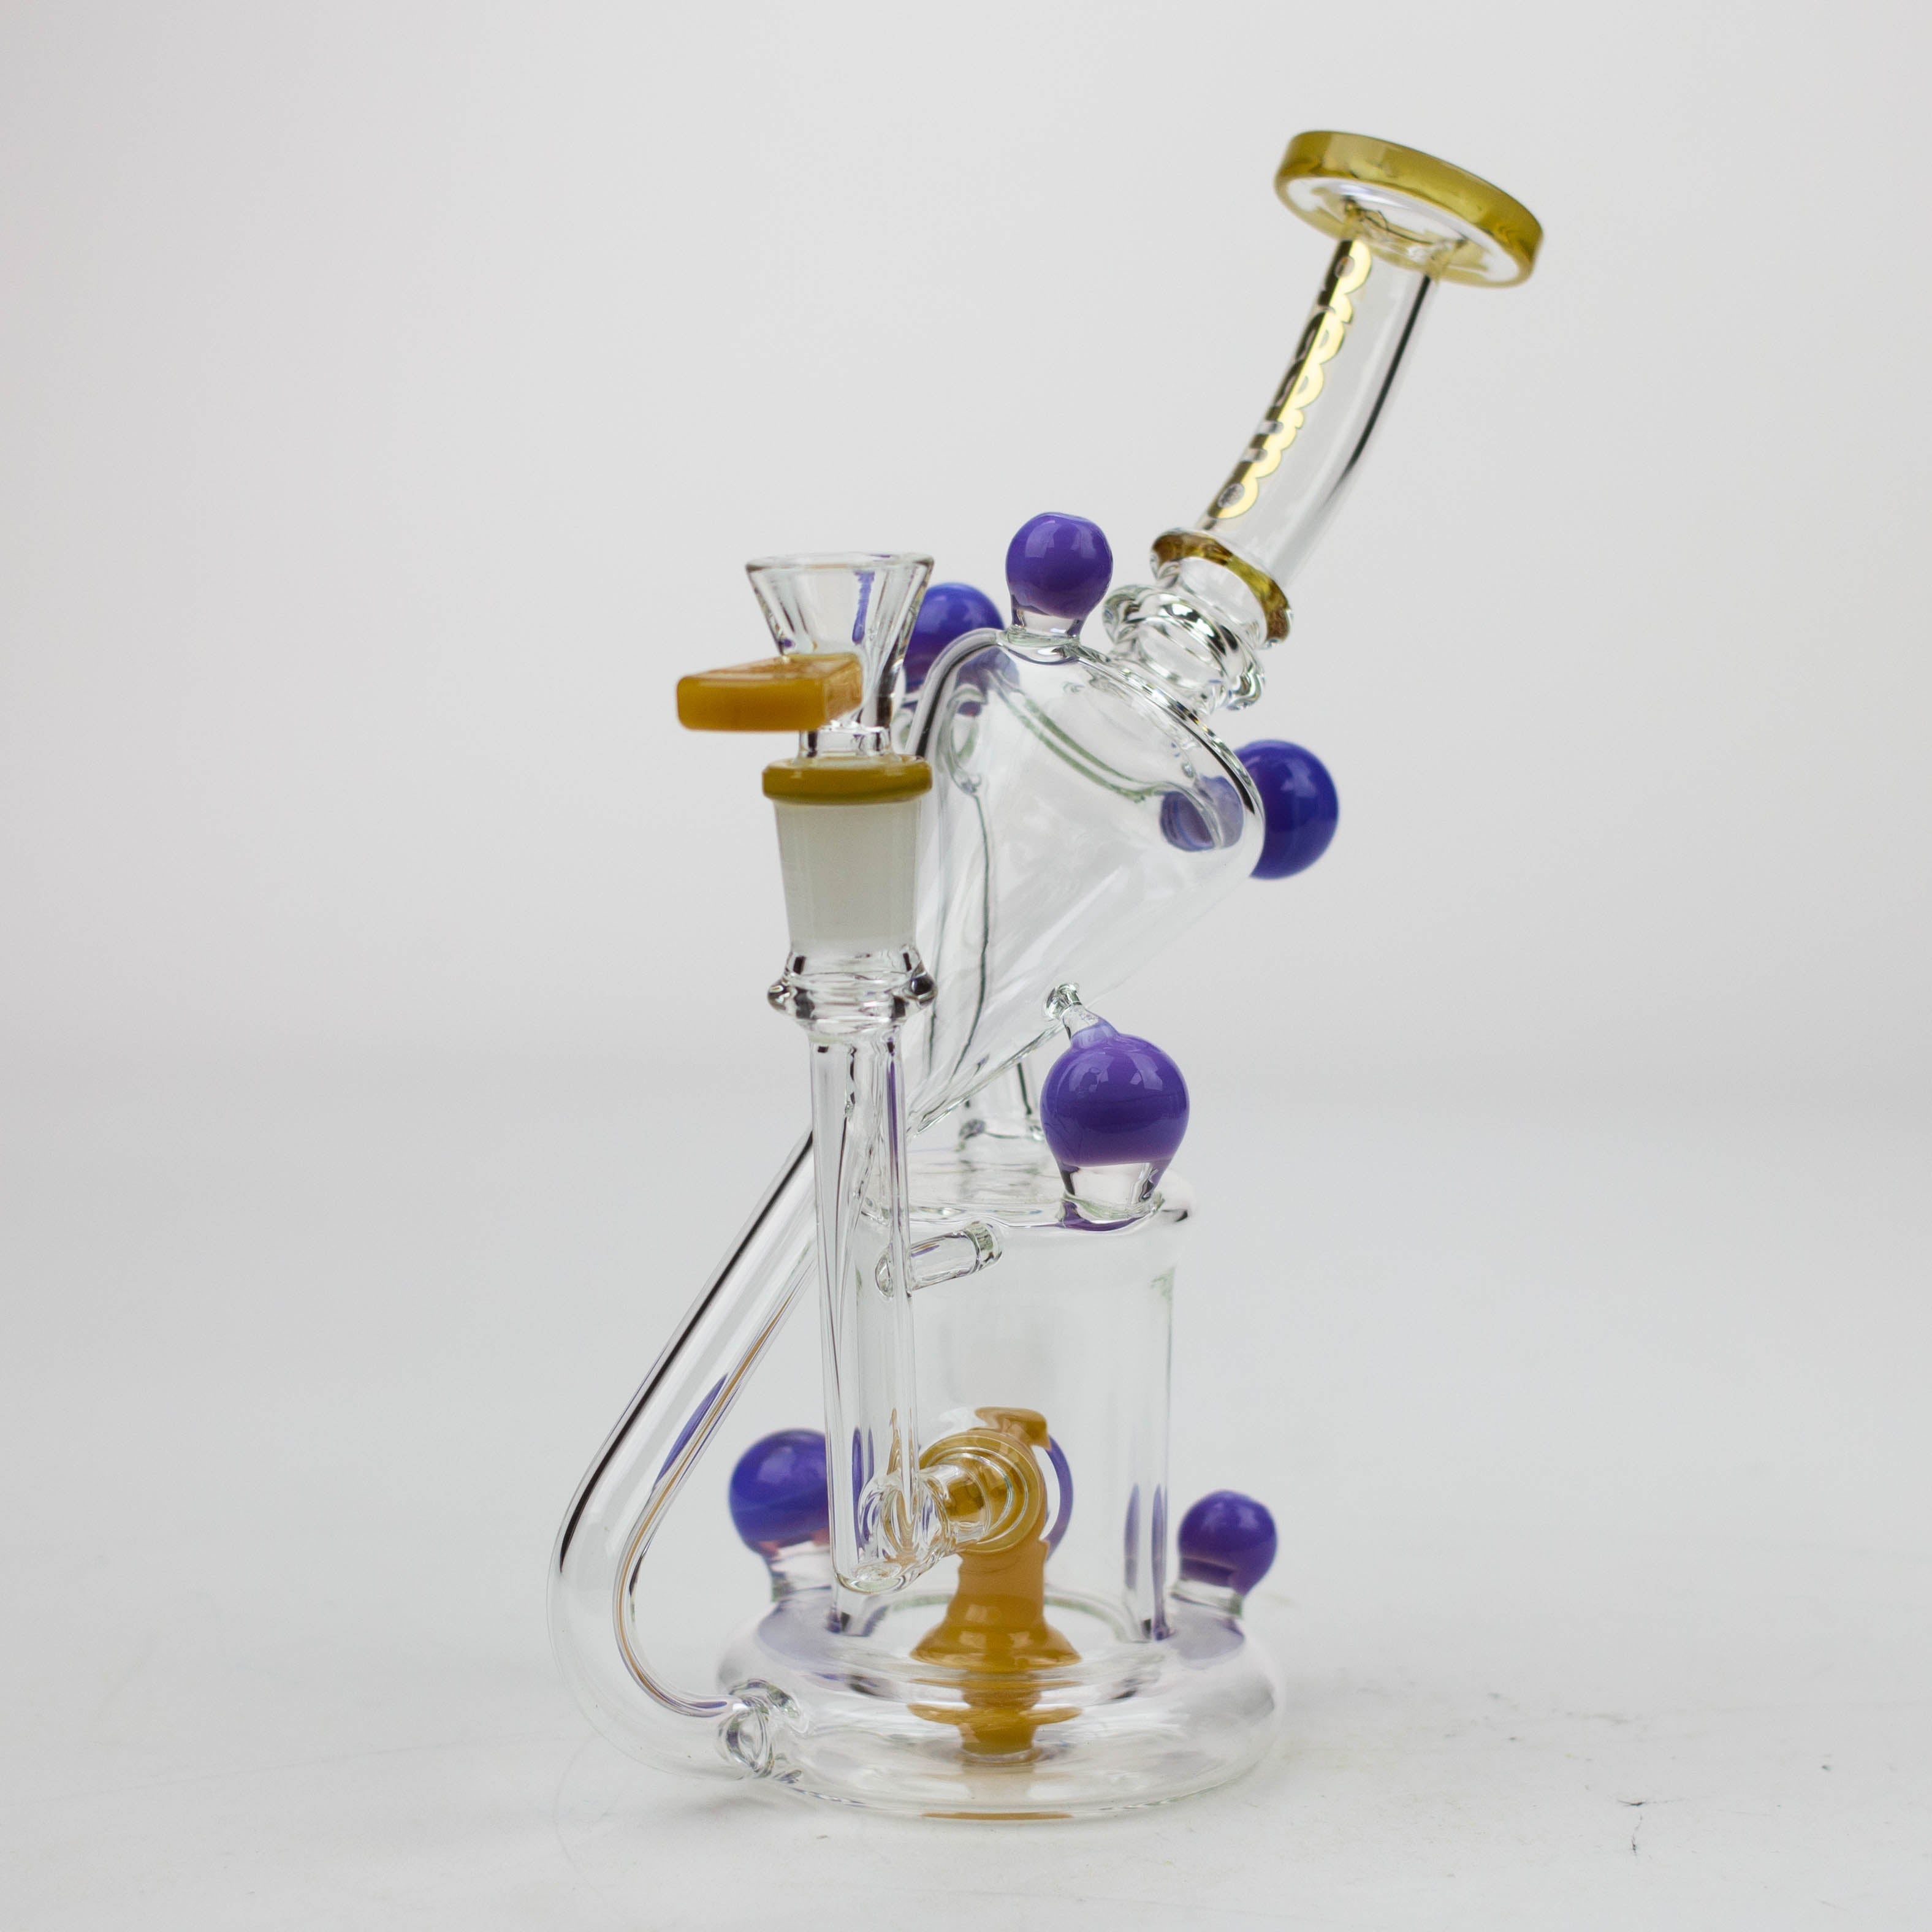 preemo - 9 inch Bauble Recycler [P033]_8